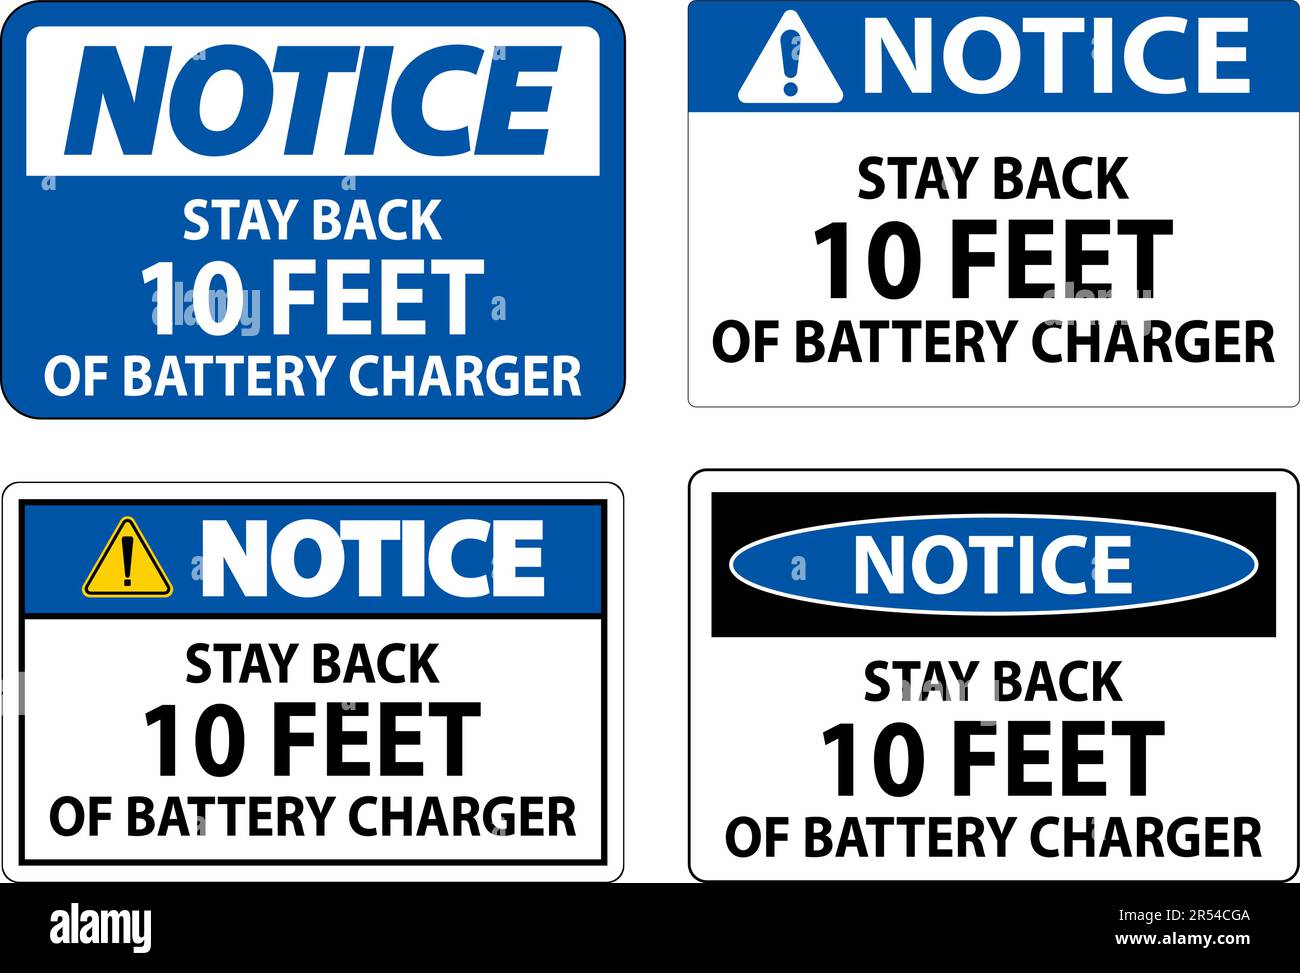 Notice Sign Stay Back 10 Feet Of Battery Charger Stock Vector